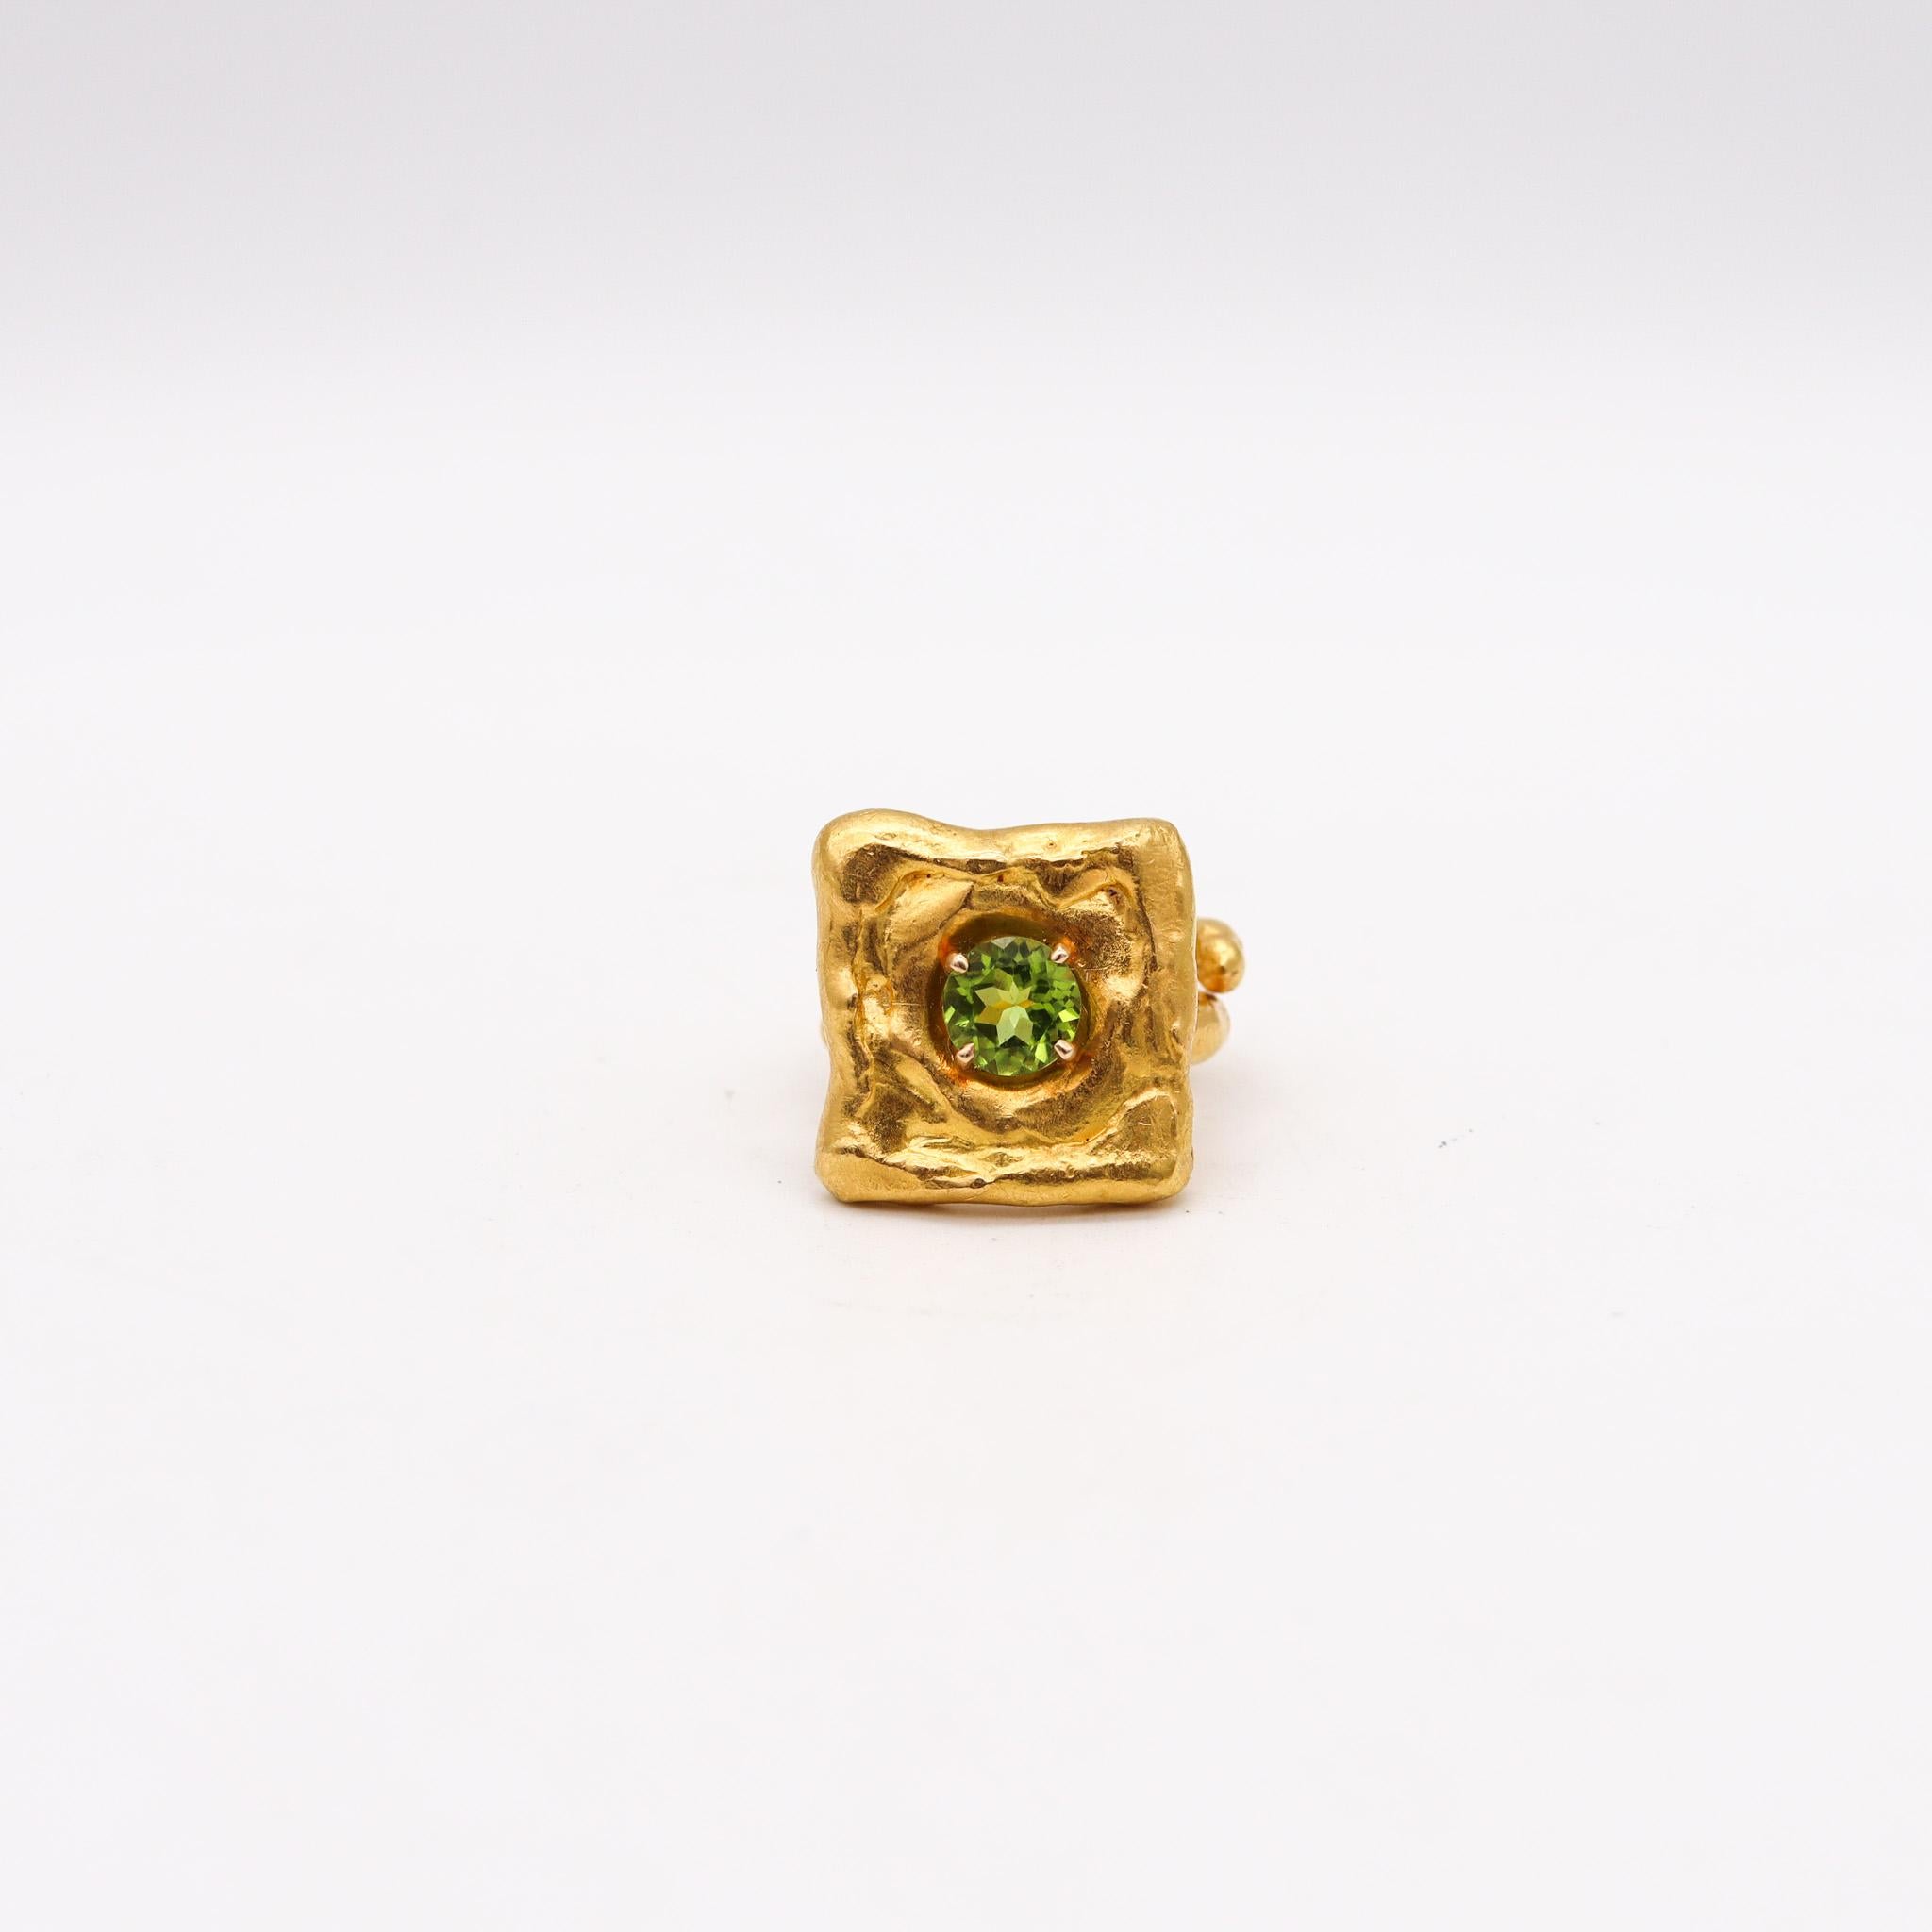 Modernist Jean Mahie Paris Rare Sculptural Cocktail Ring In 22Kt Yellow Gold With Peridot For Sale